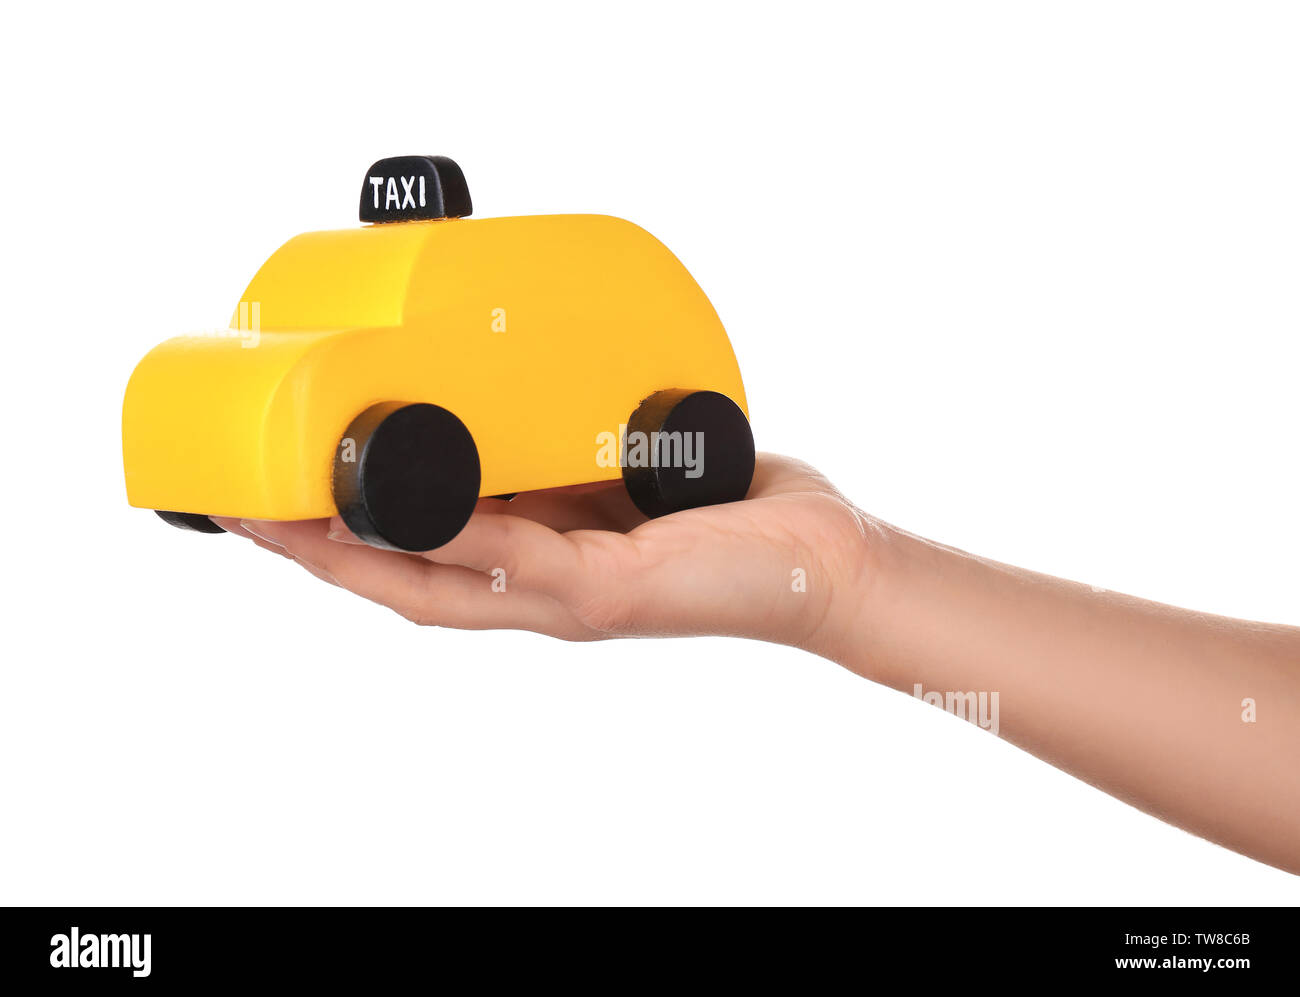 Woman holding yellow toy taxi cab on white background Stock Photo